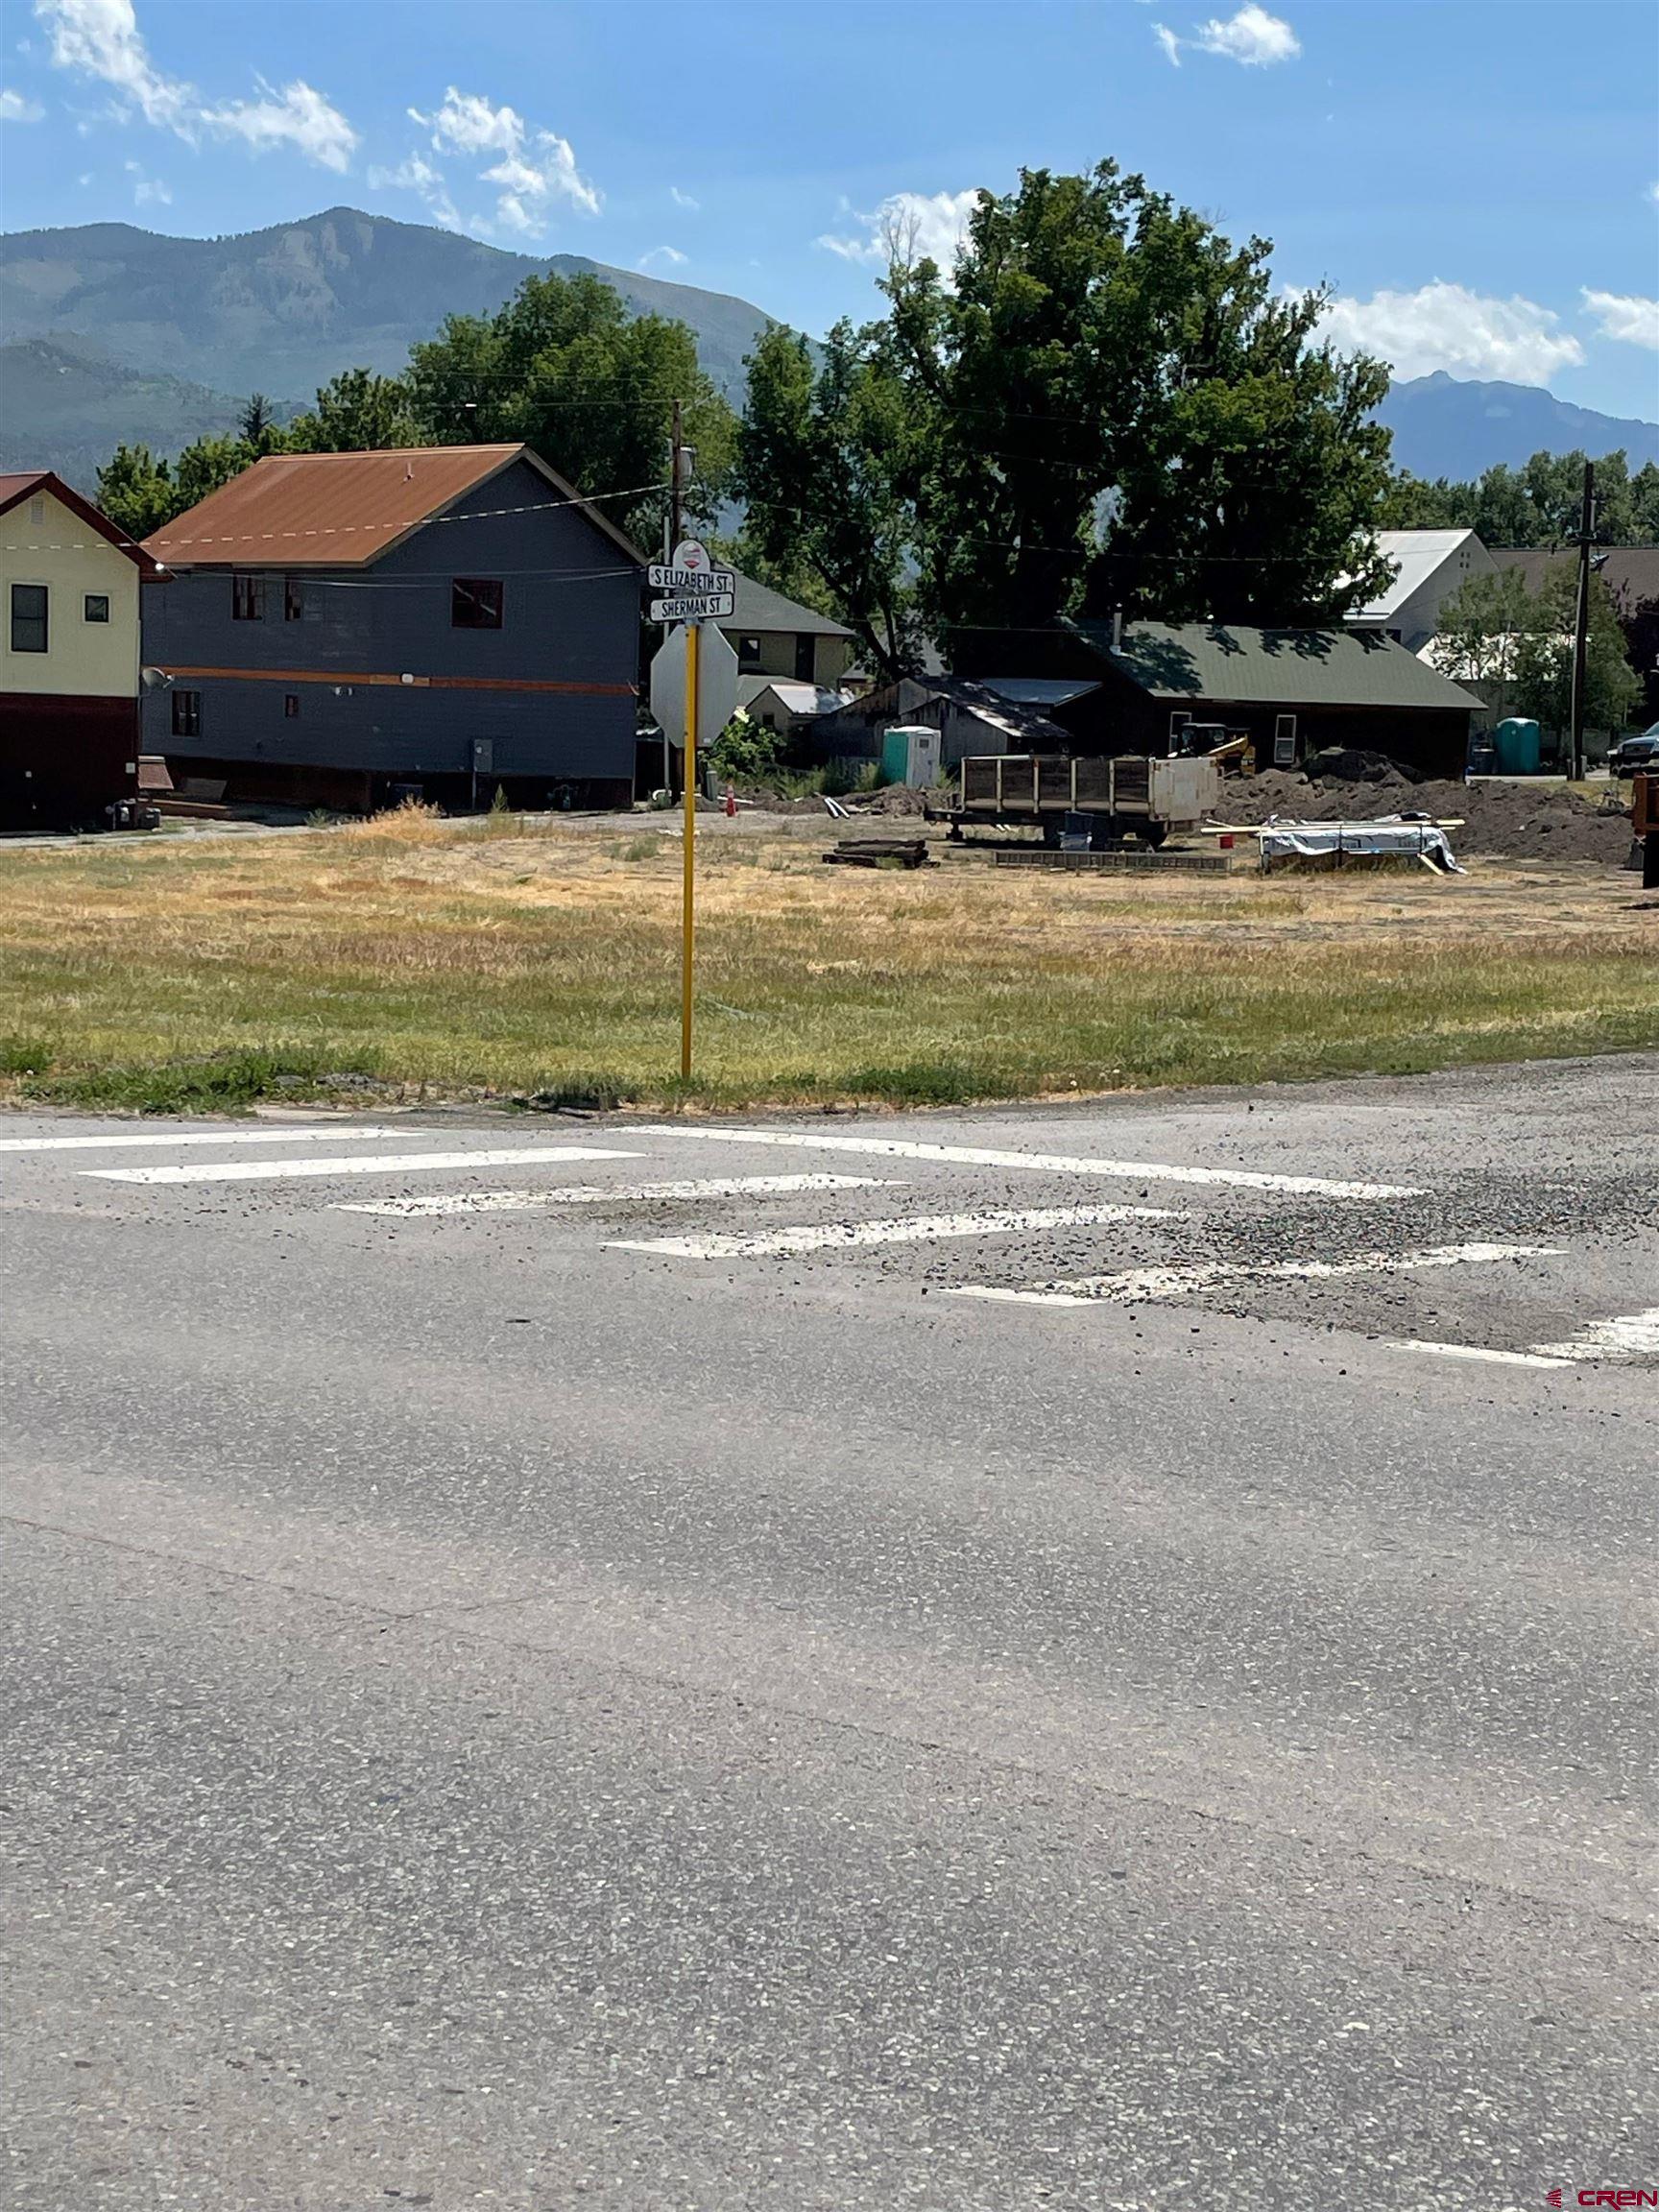 6 LOTS- ALL ZONED DOWNTOWN SERVICES. LOTS ARE ON CORNER OF SOUTH ELIZABETH AND HWY 62. HARD TO FIND THIS MANY LOTS IN THE TOWN OF RIDGWAY, ESPECIALLY WITH DOWNTOWN SERVICE ZONING. Please see Associated Documents for INFO ON DOWNTOWN SERVICE from Town of Ridgway.